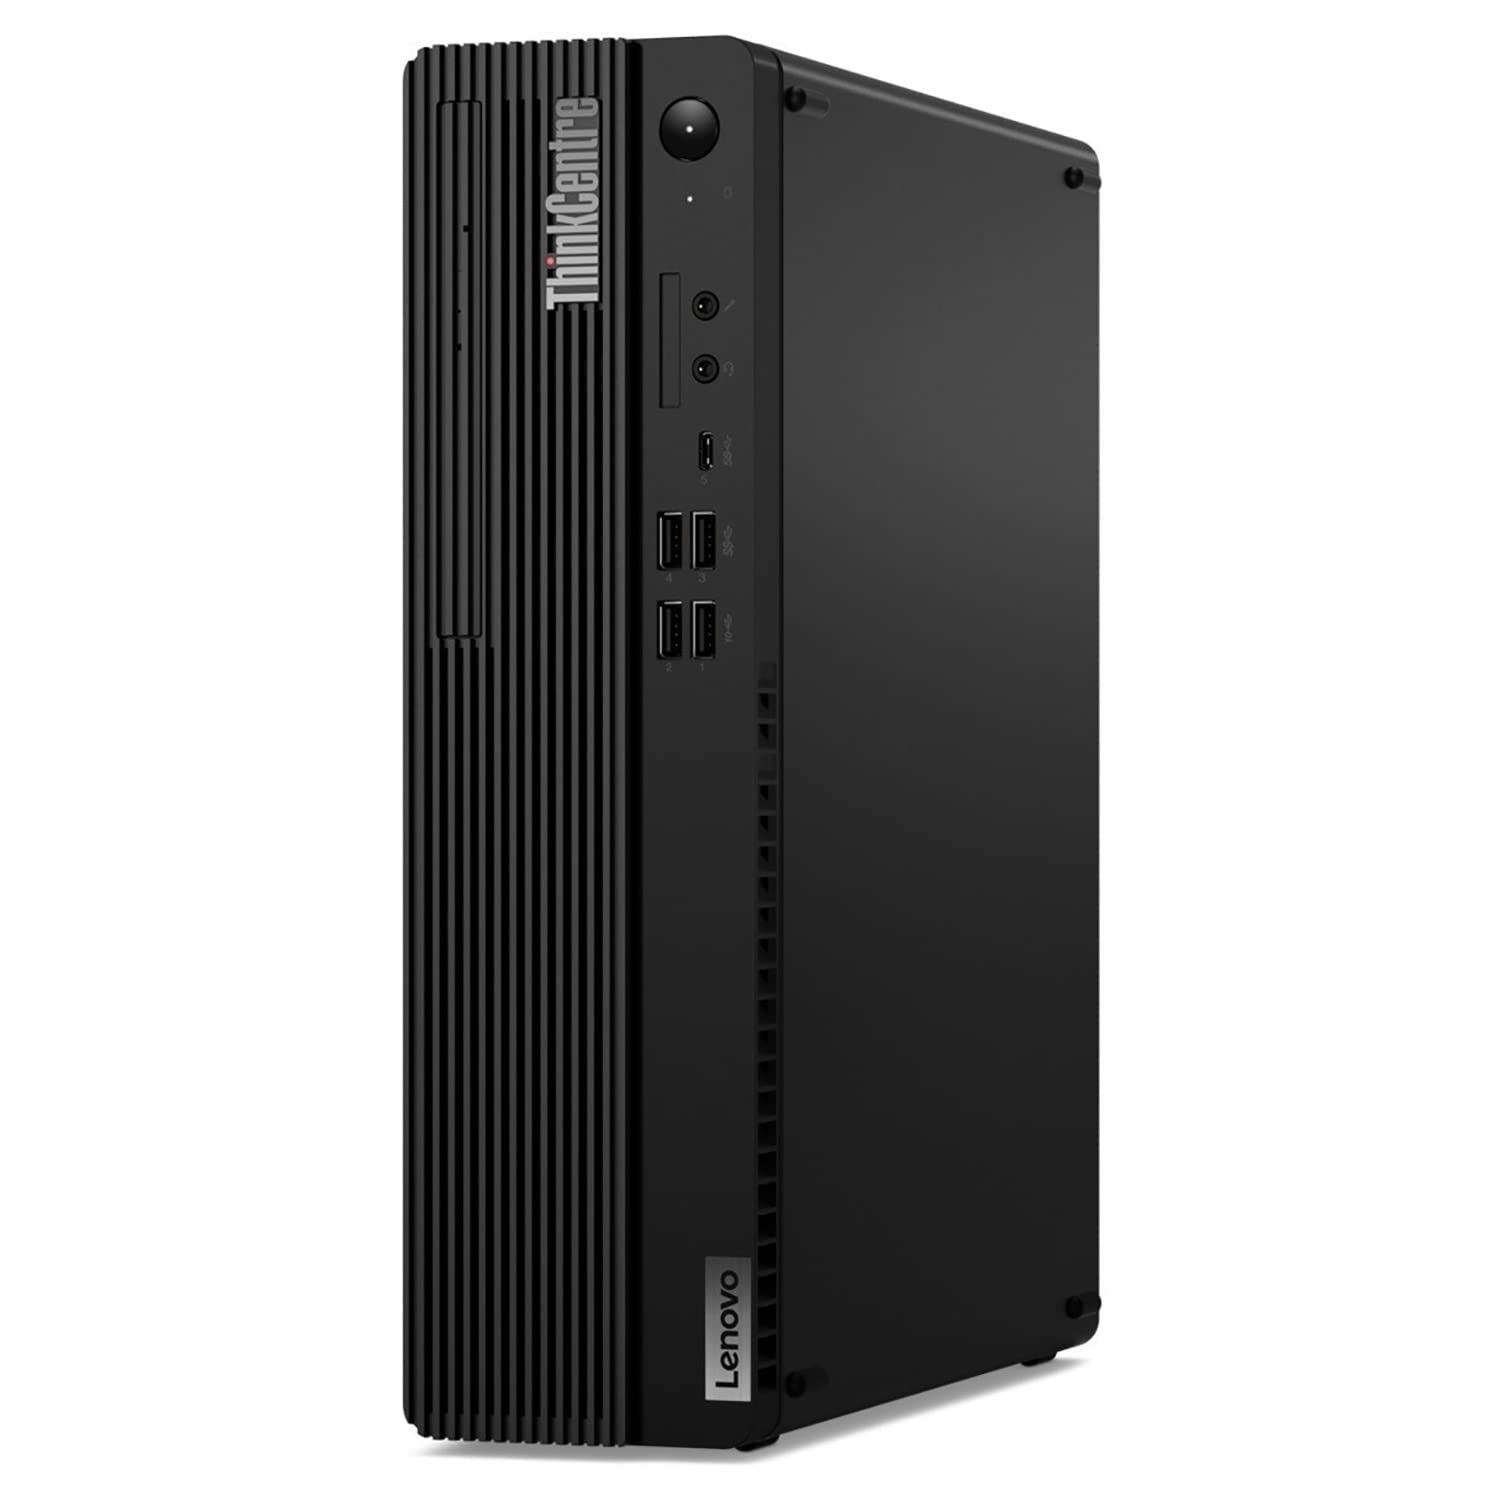 Lenovo ThinkCentre M80s SFF Business Desktop, Intel Hexa-Core i5-10500 up to 4.3GHz (Beat i7-8700), 32GB DDR4 RAM, 2TB PCIe SSD, DVDRW, Ethernet, WiFi Adapter, Windows 10 Pro, BROAG Extension Cable